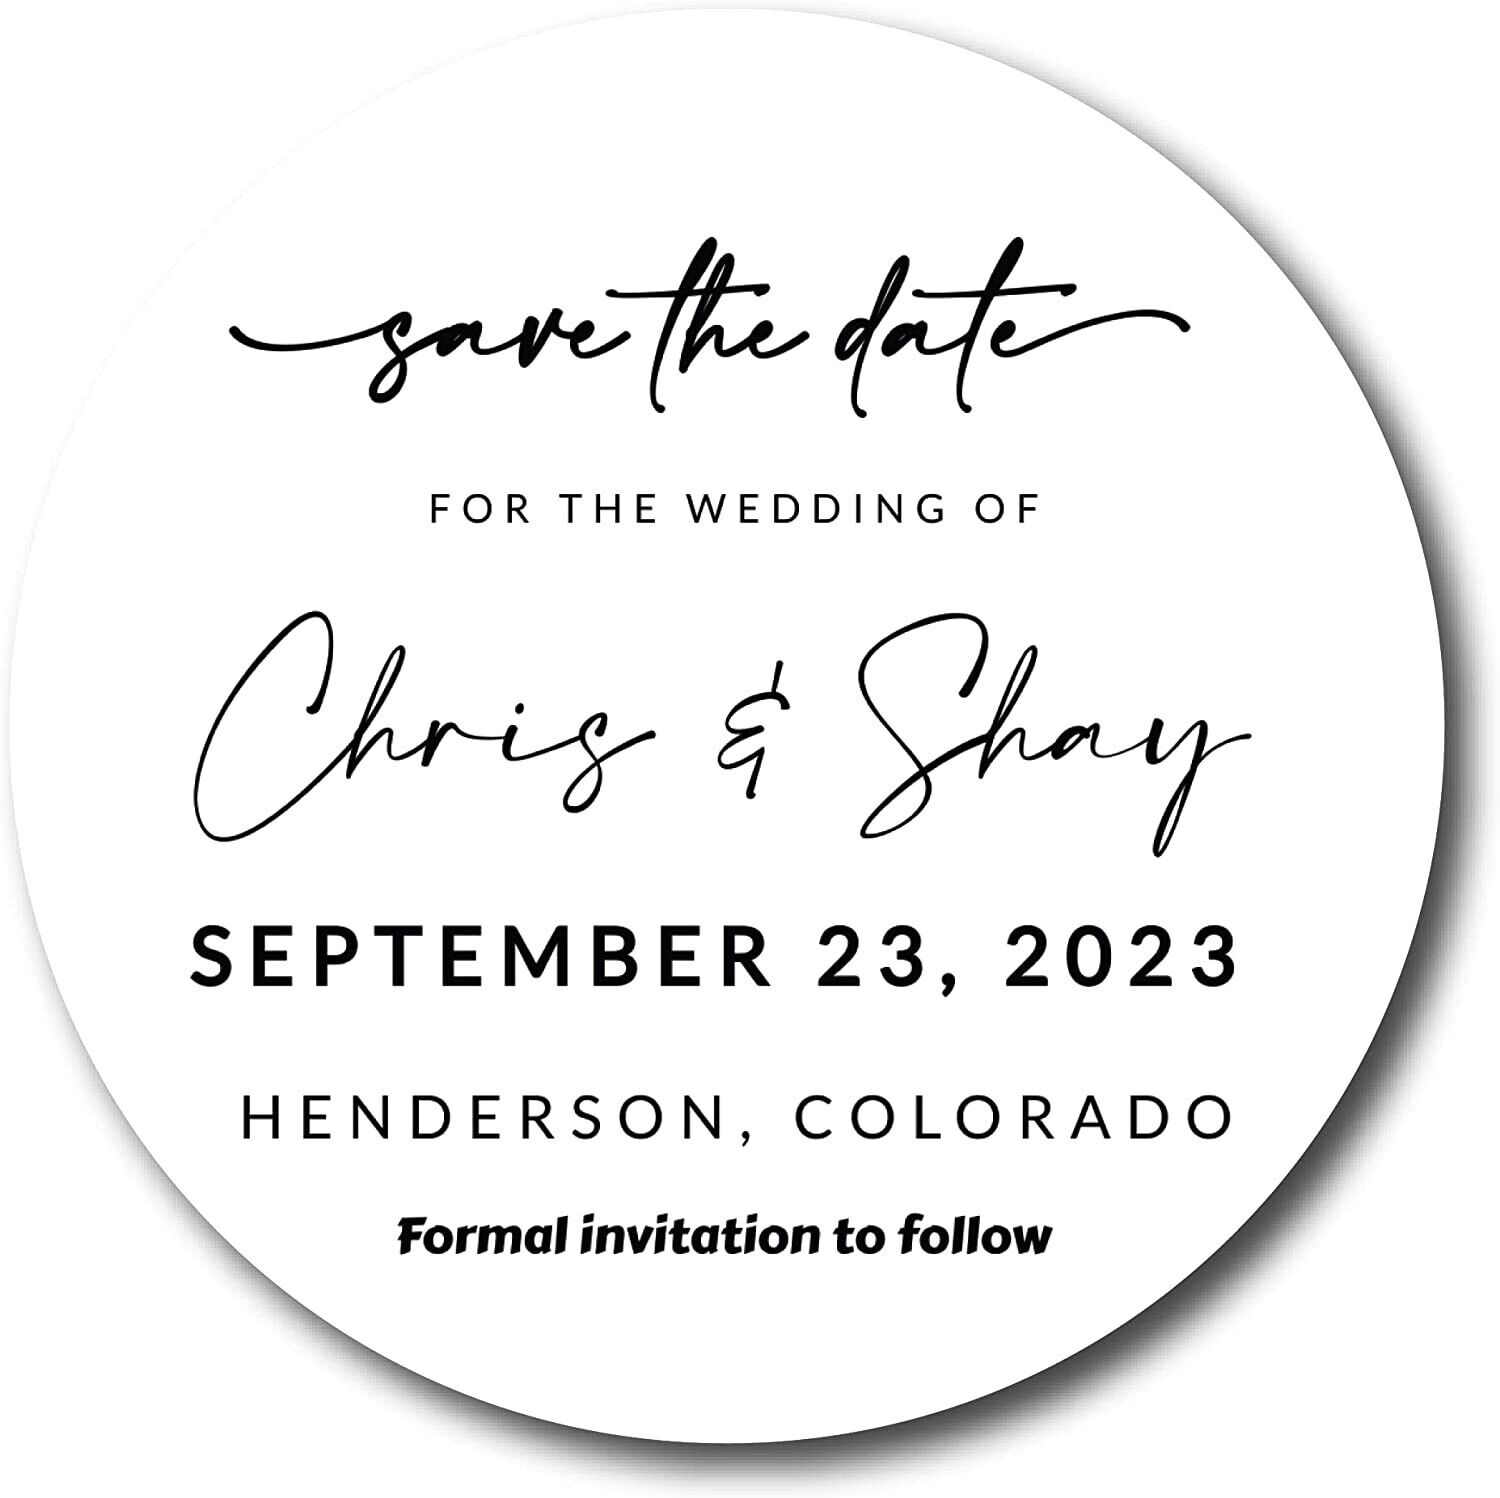 Personalized Save The Date Magnets | Customize Image and Text | 4-Inch by 4-Inch